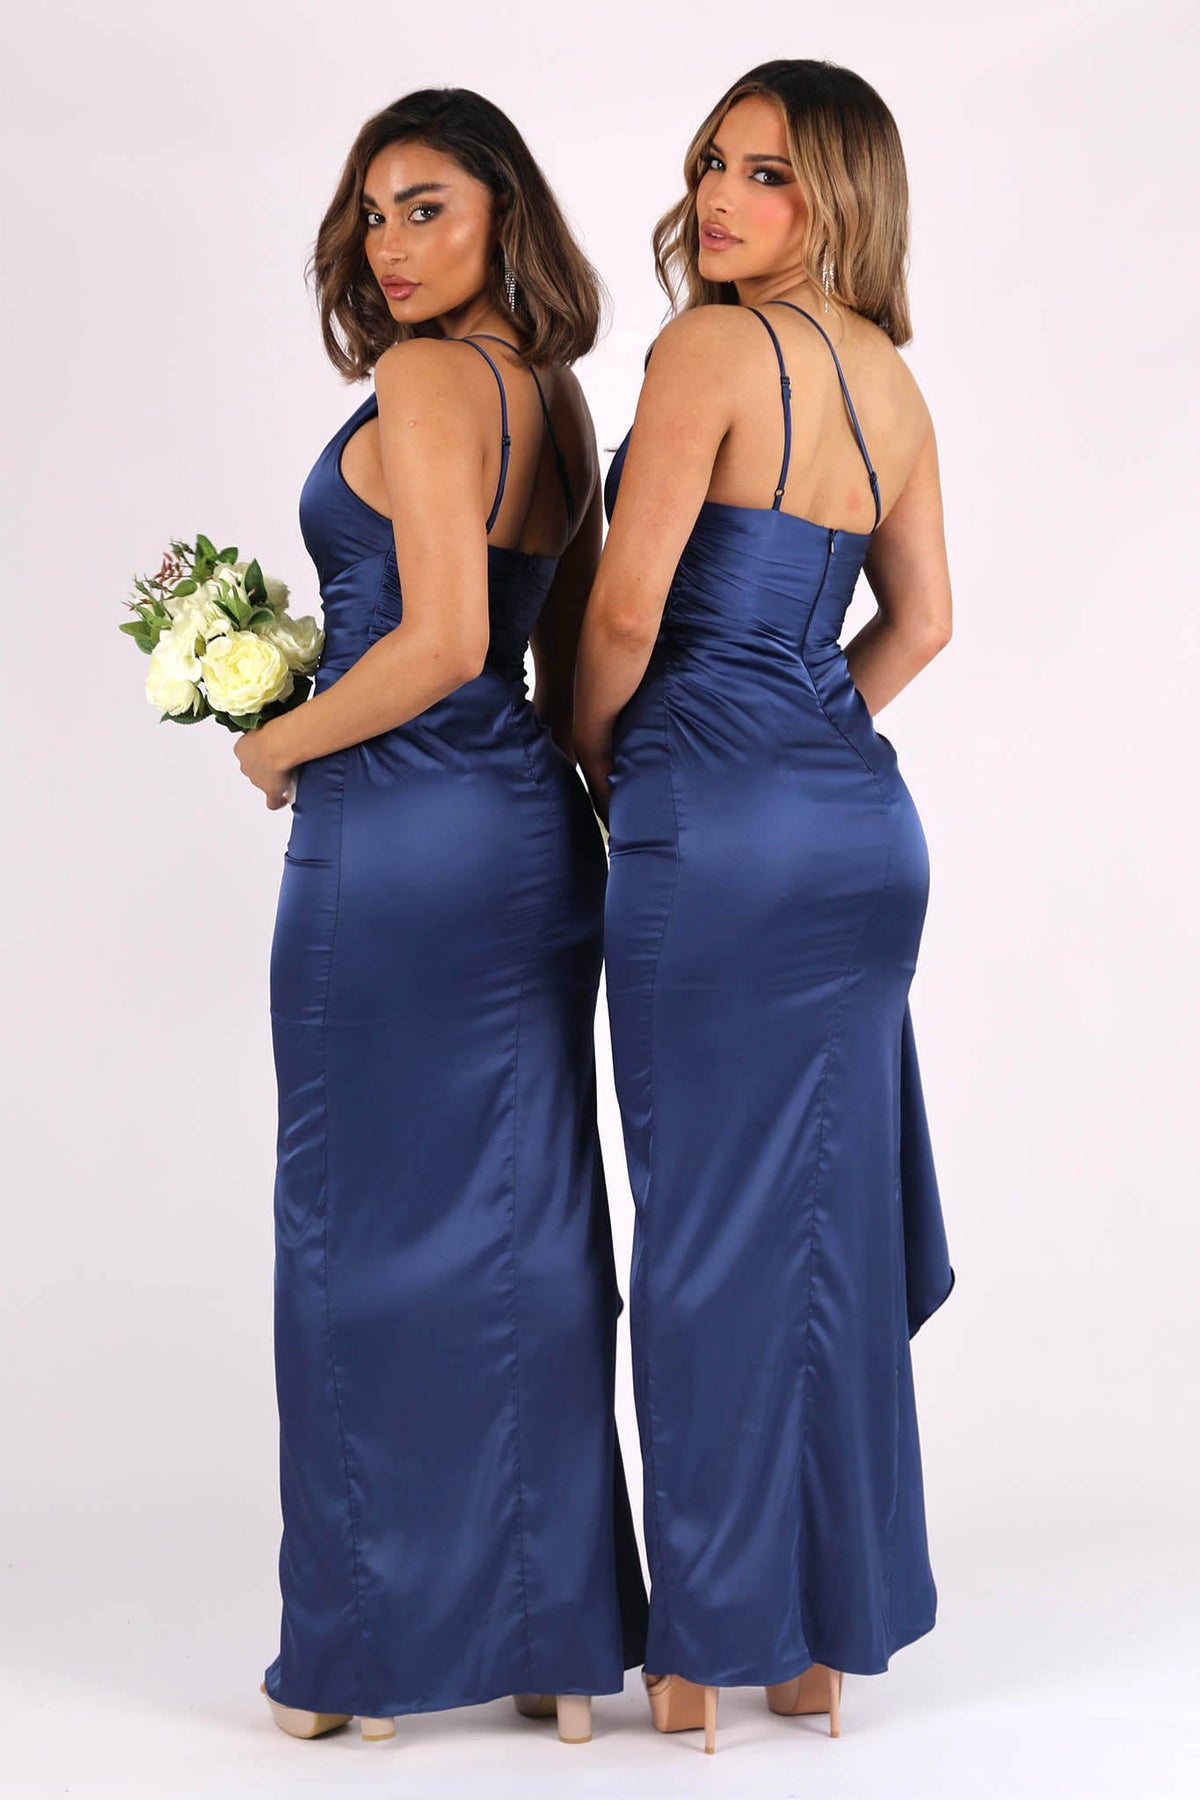 Back Image of 2 Bridesmaids wearing One Shoulder Satin Maxi Dress with Gathering Detail at Waist, Side Split and Frill Hemline in Navy Blue Color